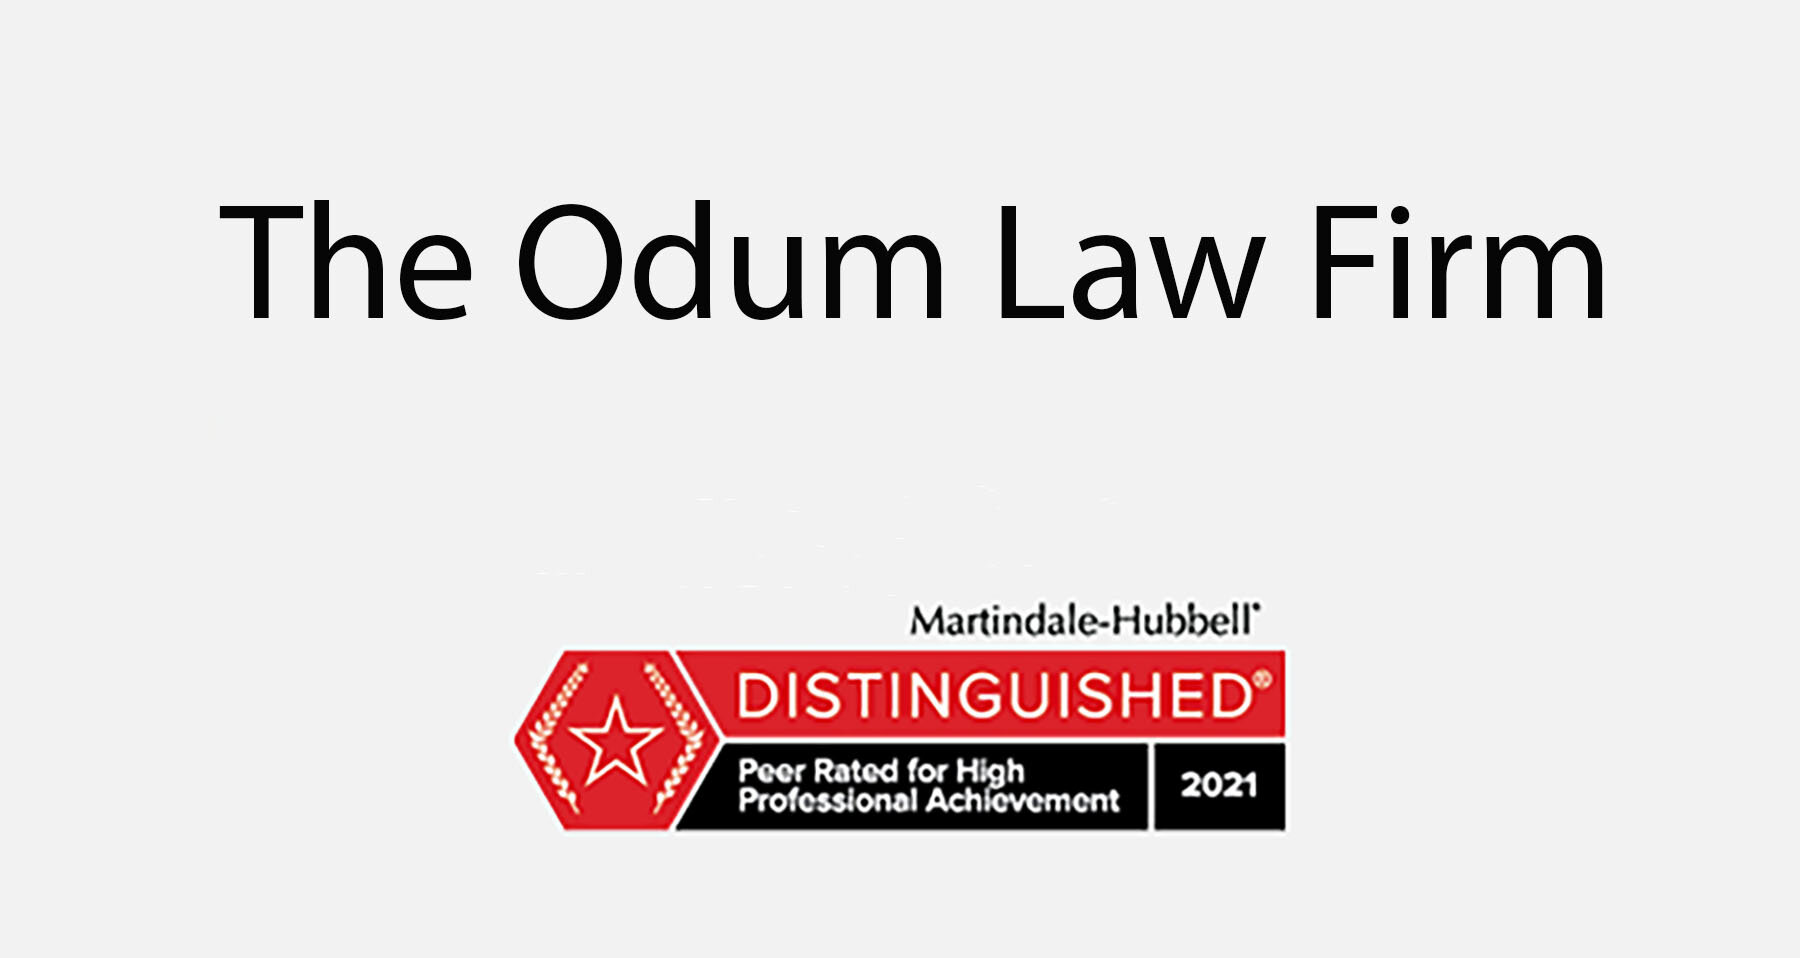 The Odum Law Firm